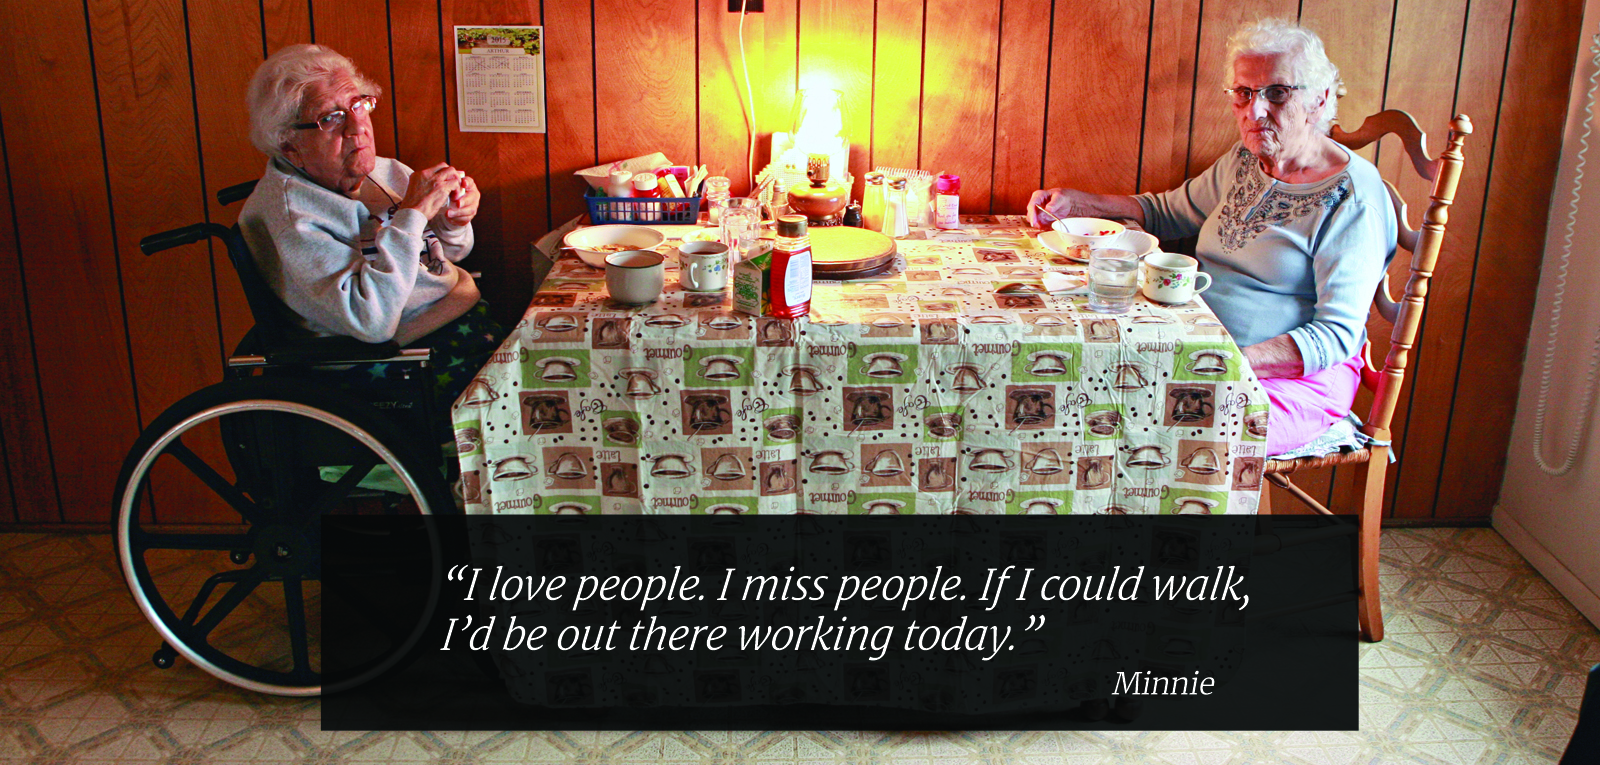 I love people. I miss people. If I could walk, I'd be out there working today. Minnie